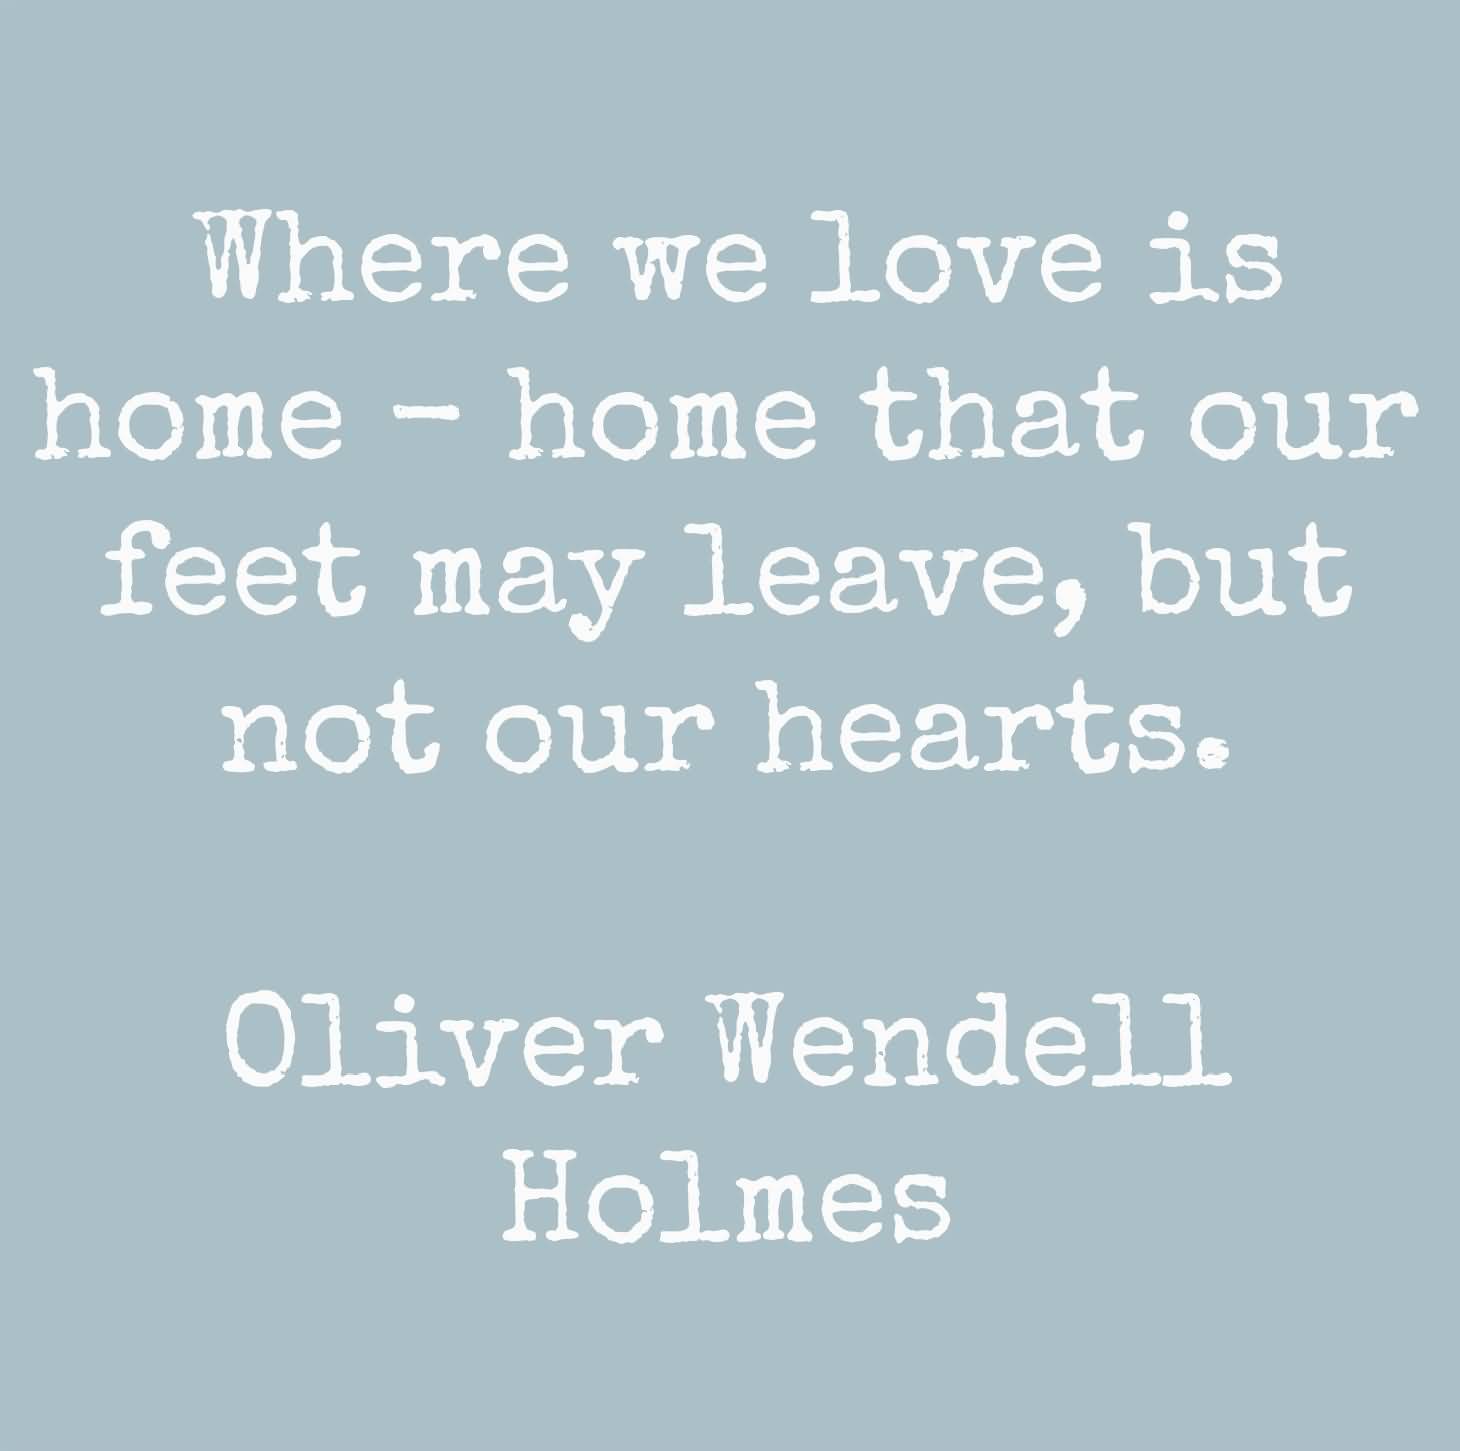 Where-we-love-is-home-home-that-our-feet-may-leave-but-not-our-hearts ...